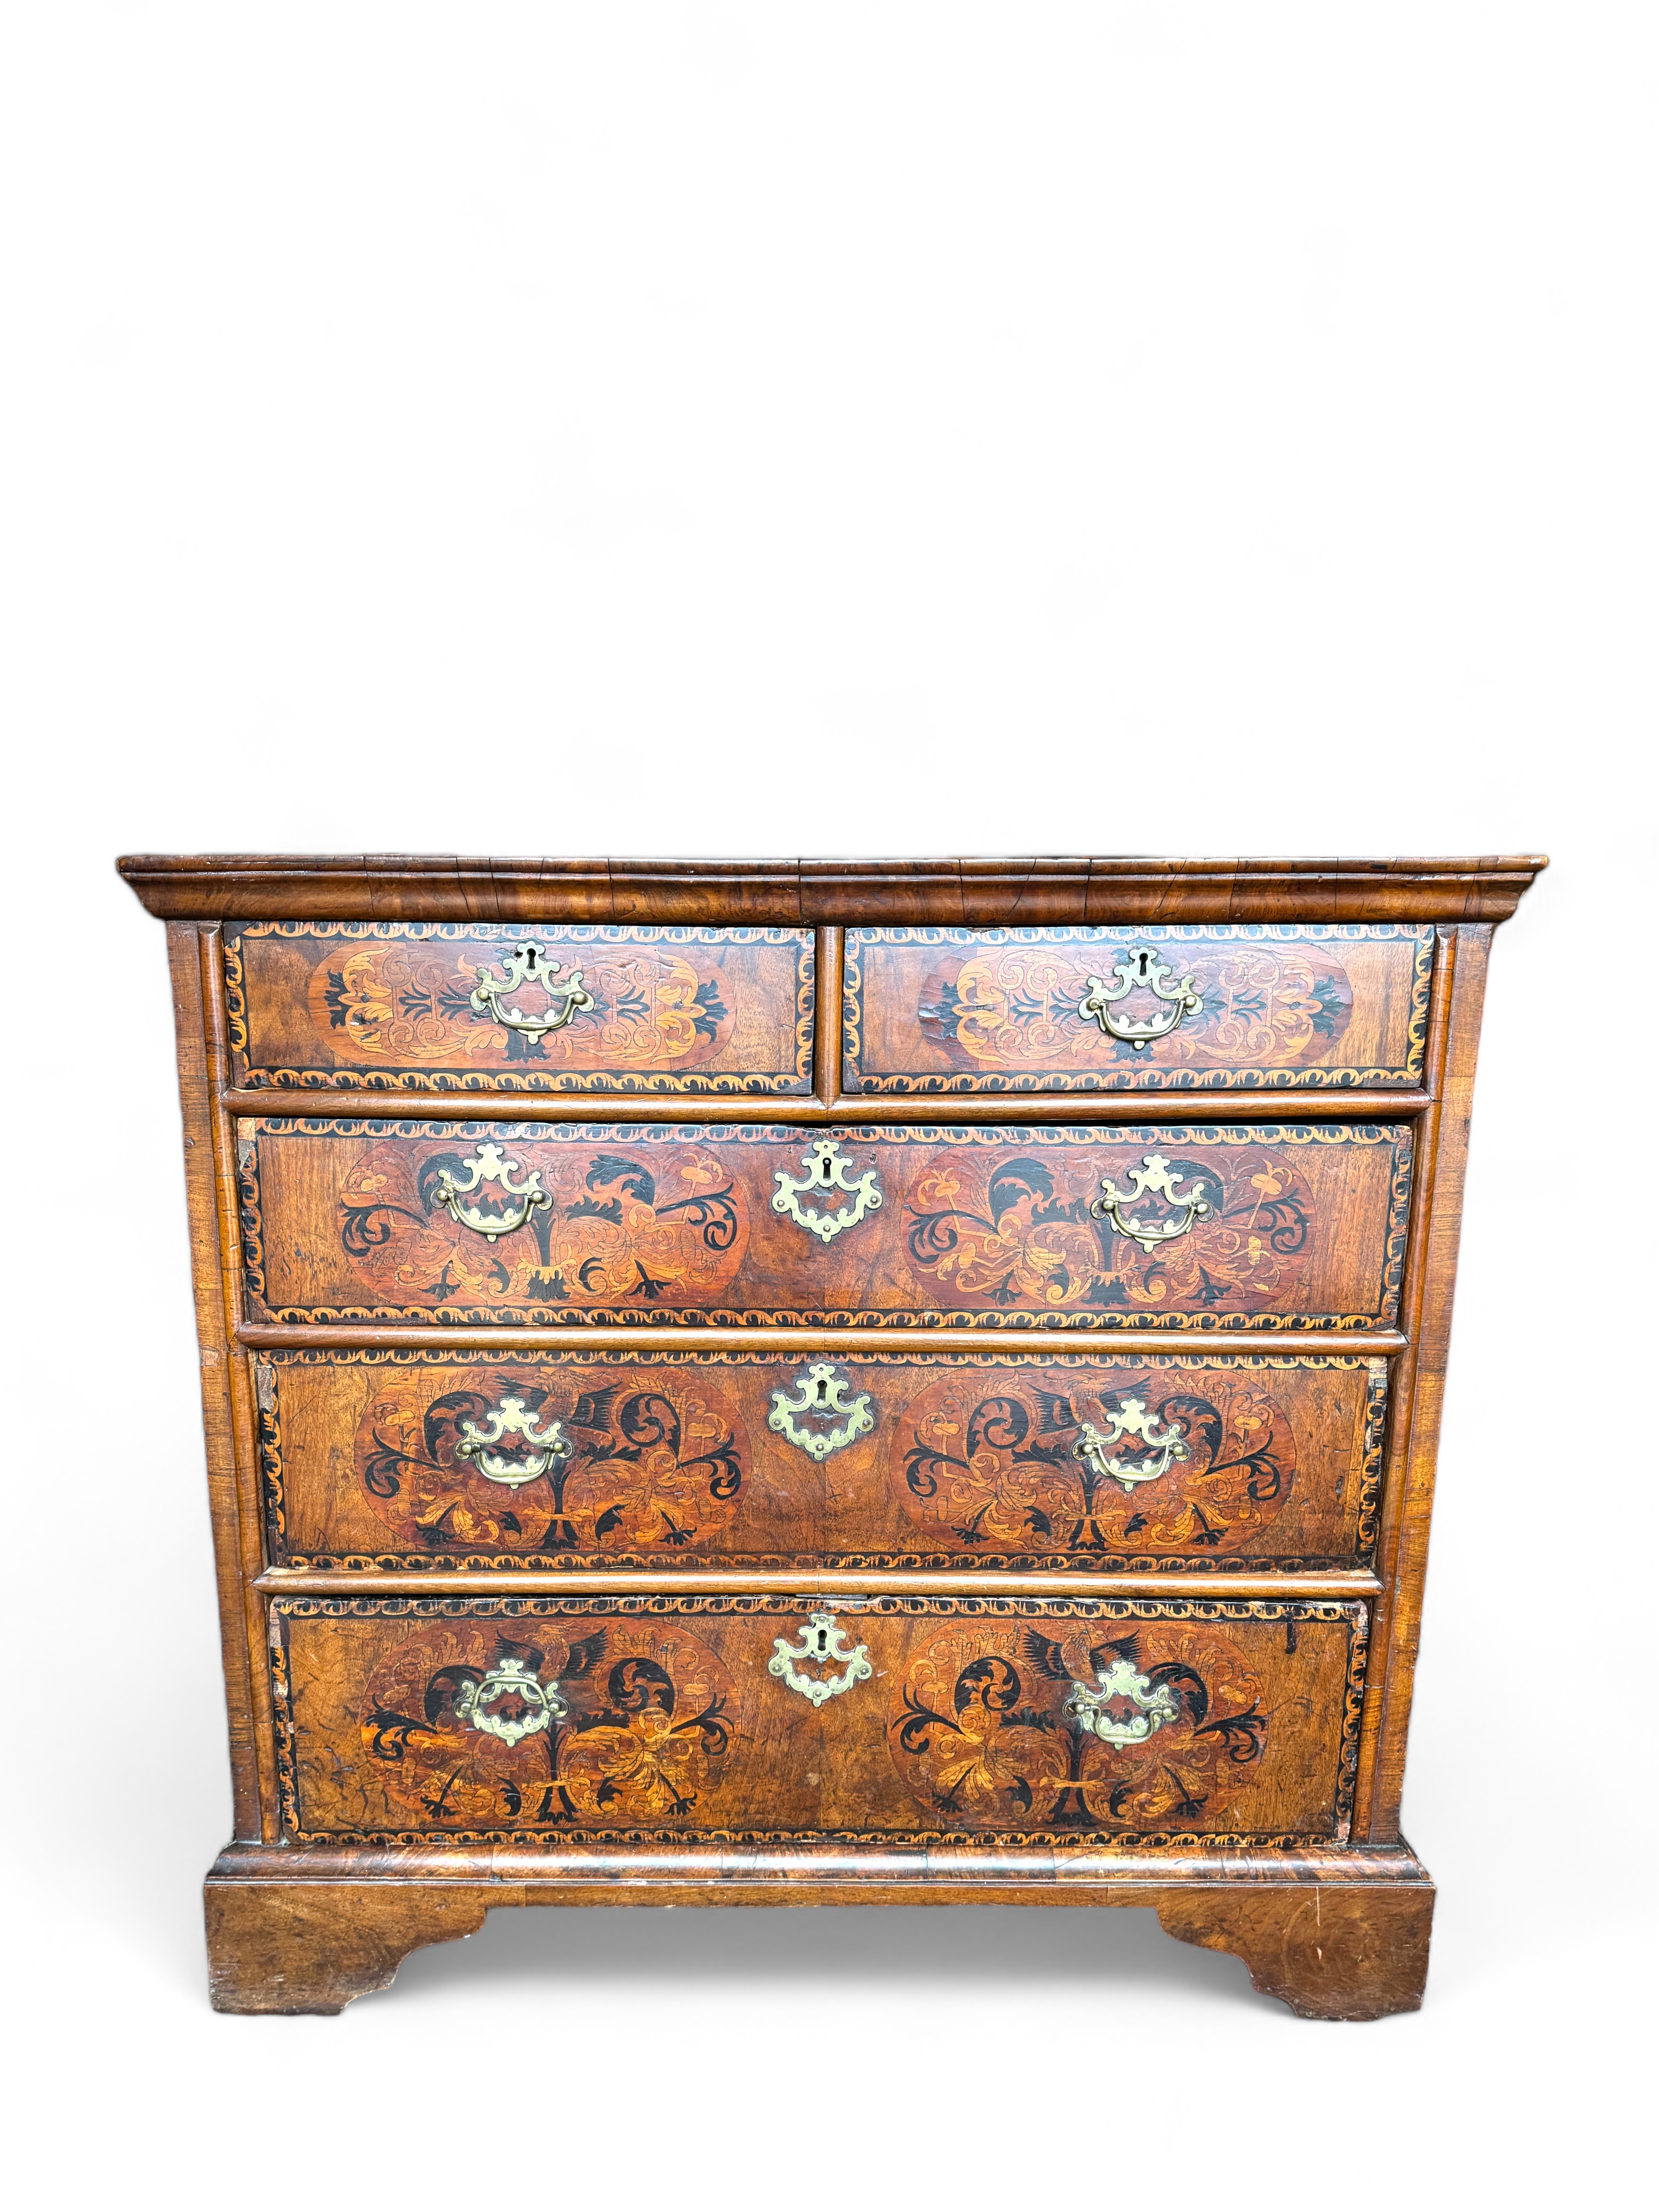 A William and Mary walnut, oak, sycamore and ebony marquetry chest